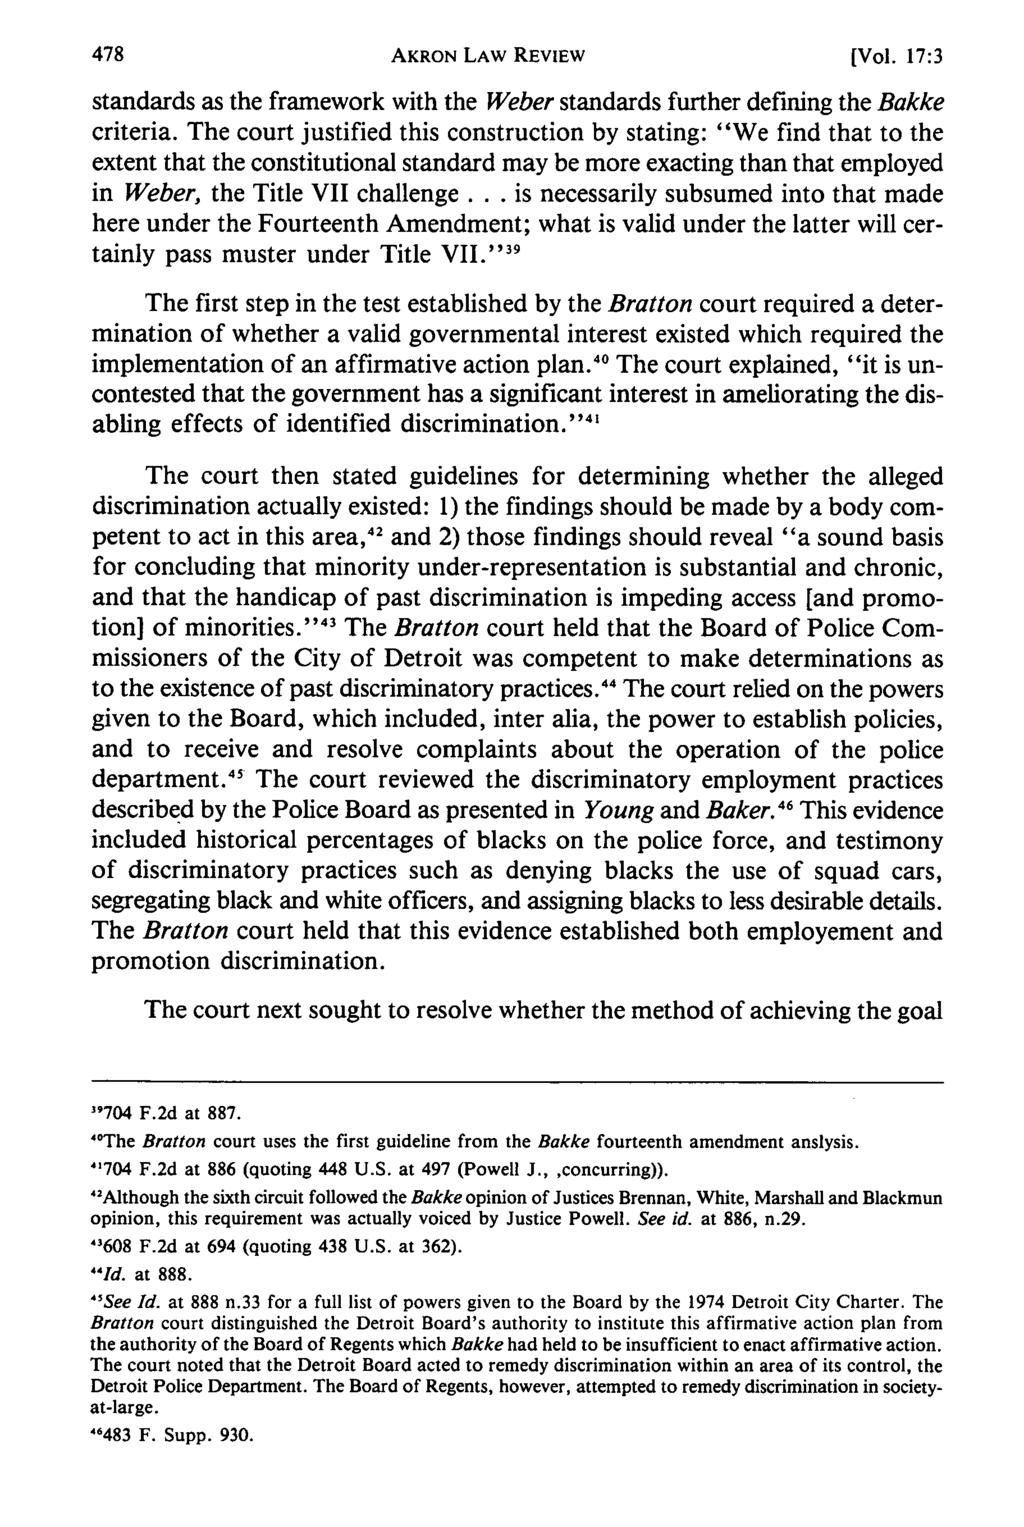 Akron Law AKRON Review, LAW Vol. 17 REVIEW [1984], Iss. 3, Art. 9 [Vol. 17:3 standards as the framework with the Weber standards further defining the Bakke criteria.